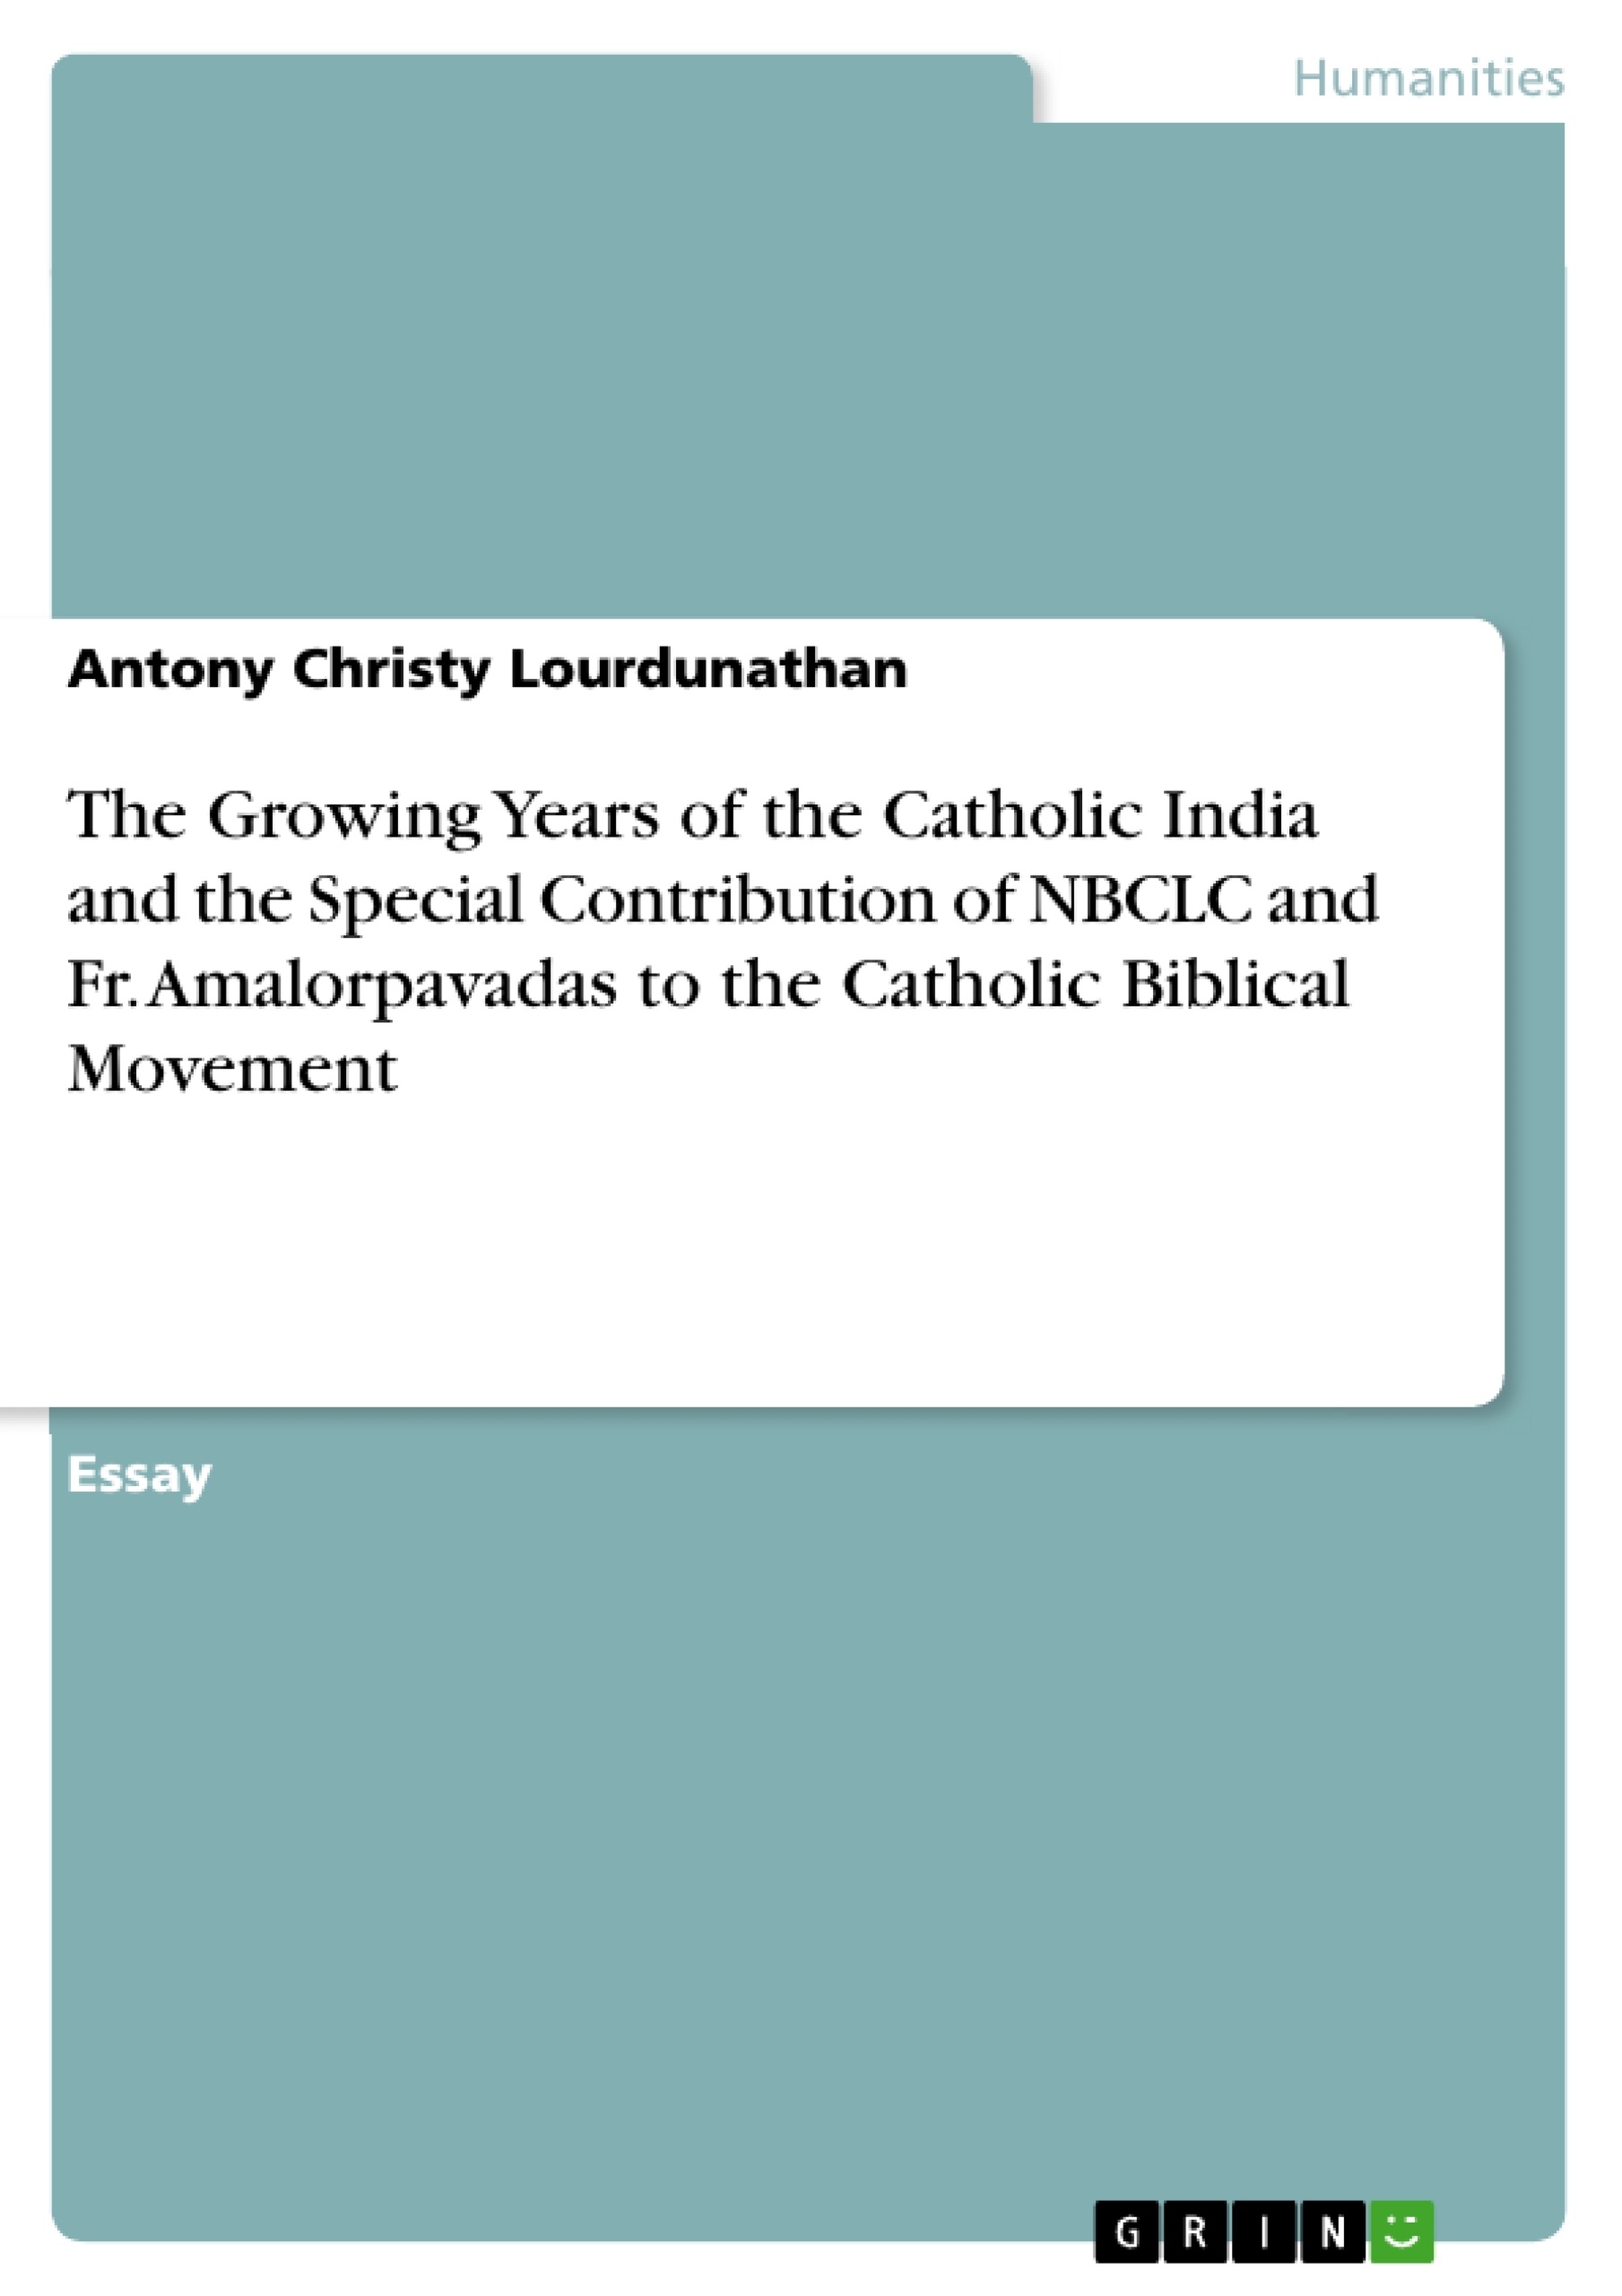 Titre: The Growing Years of the Catholic India and the Special Contribution of NBCLC and Fr. Amalorpavadas to the Catholic Biblical Movement